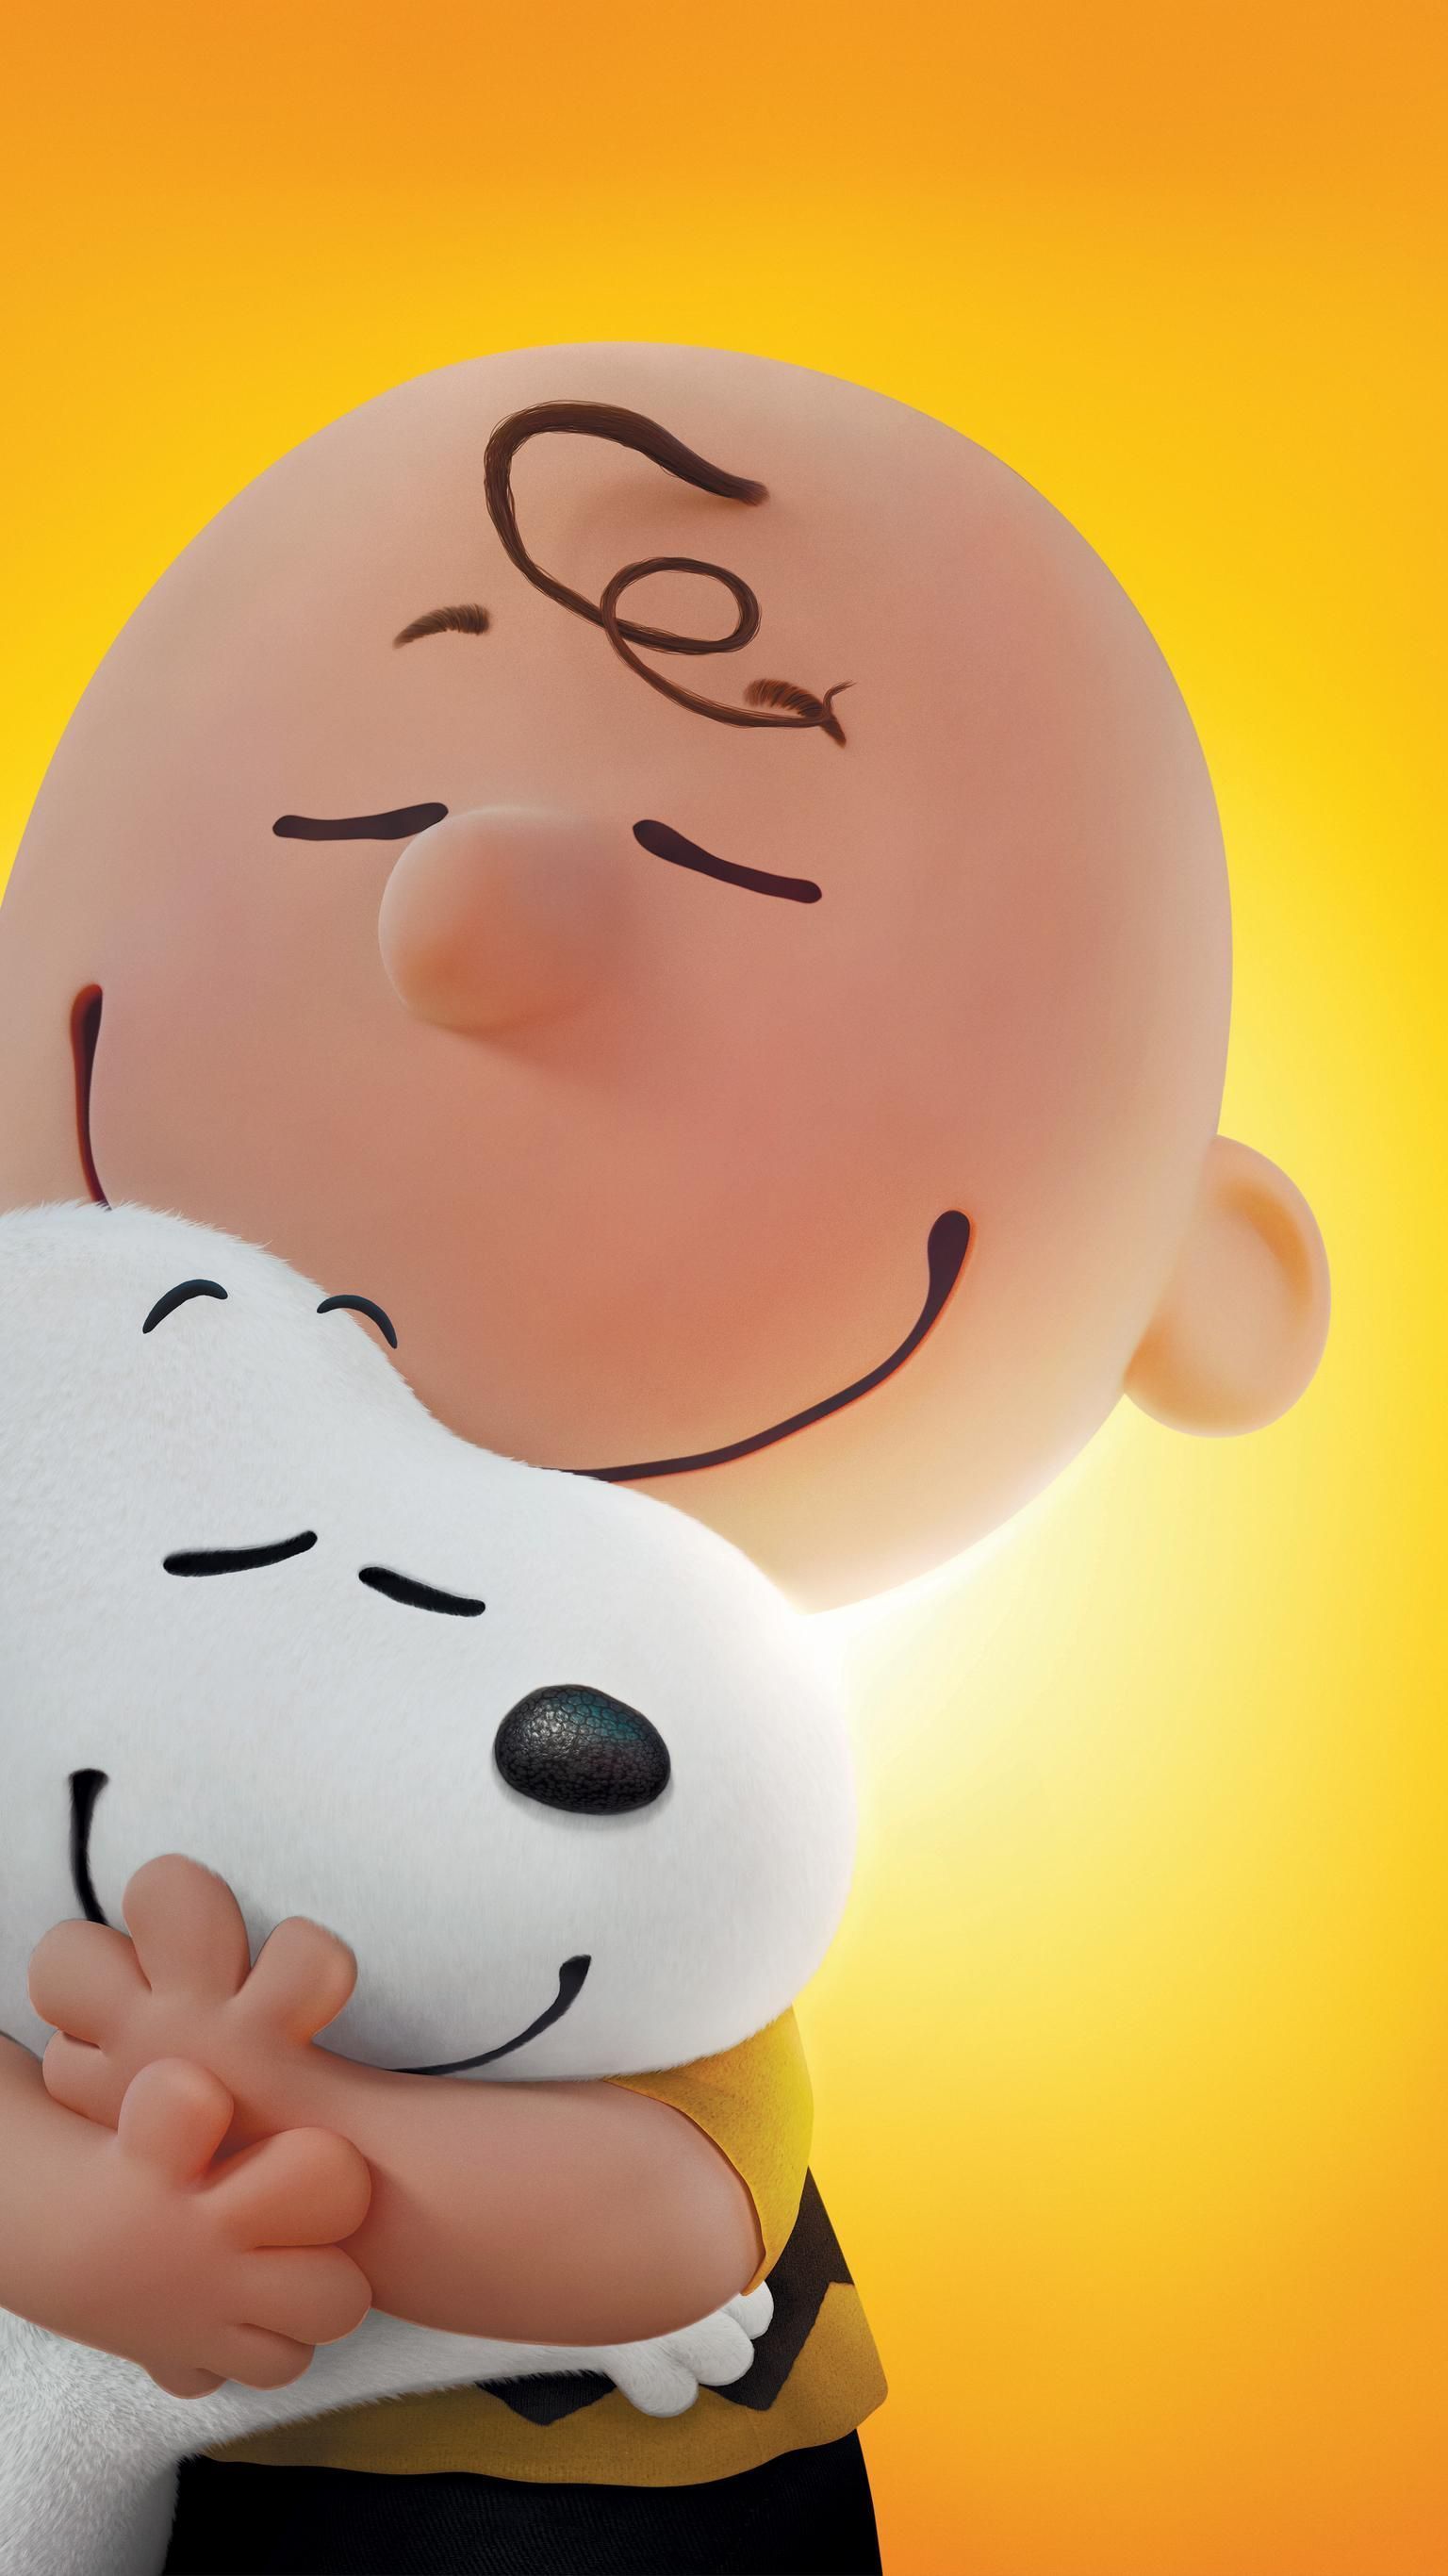 The Peanuts Movie Wallpaper Free The Peanuts Movie Background